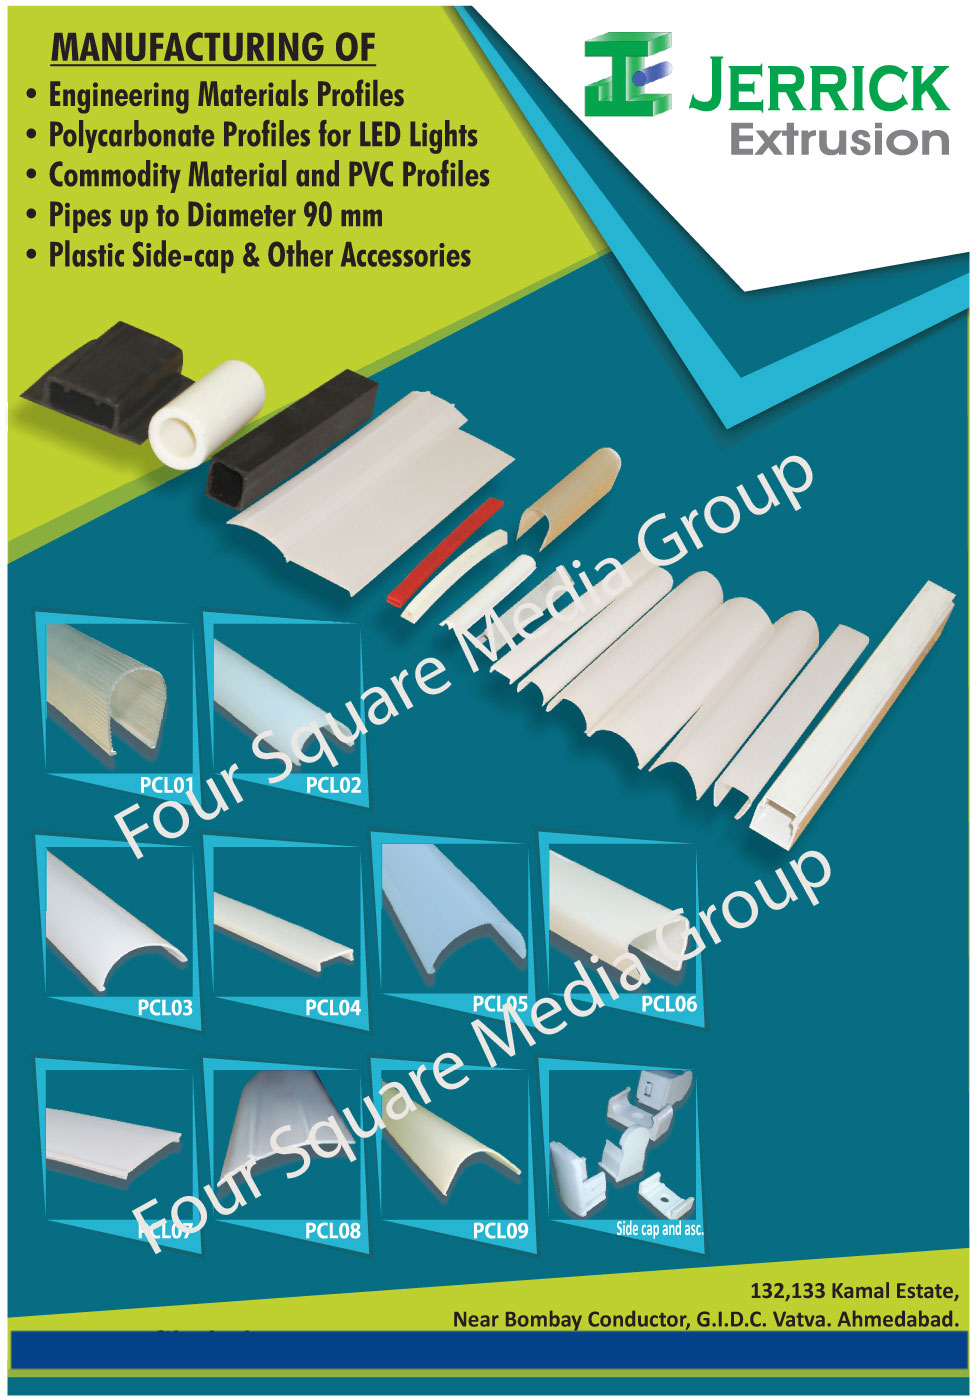 Engineering Material Profiles, Led Light Polycarbonate Profile, Commodity Materials, PVC Profiles, Plastic Pipes, Plastic Side Caps, Tube Light Housing Accessories